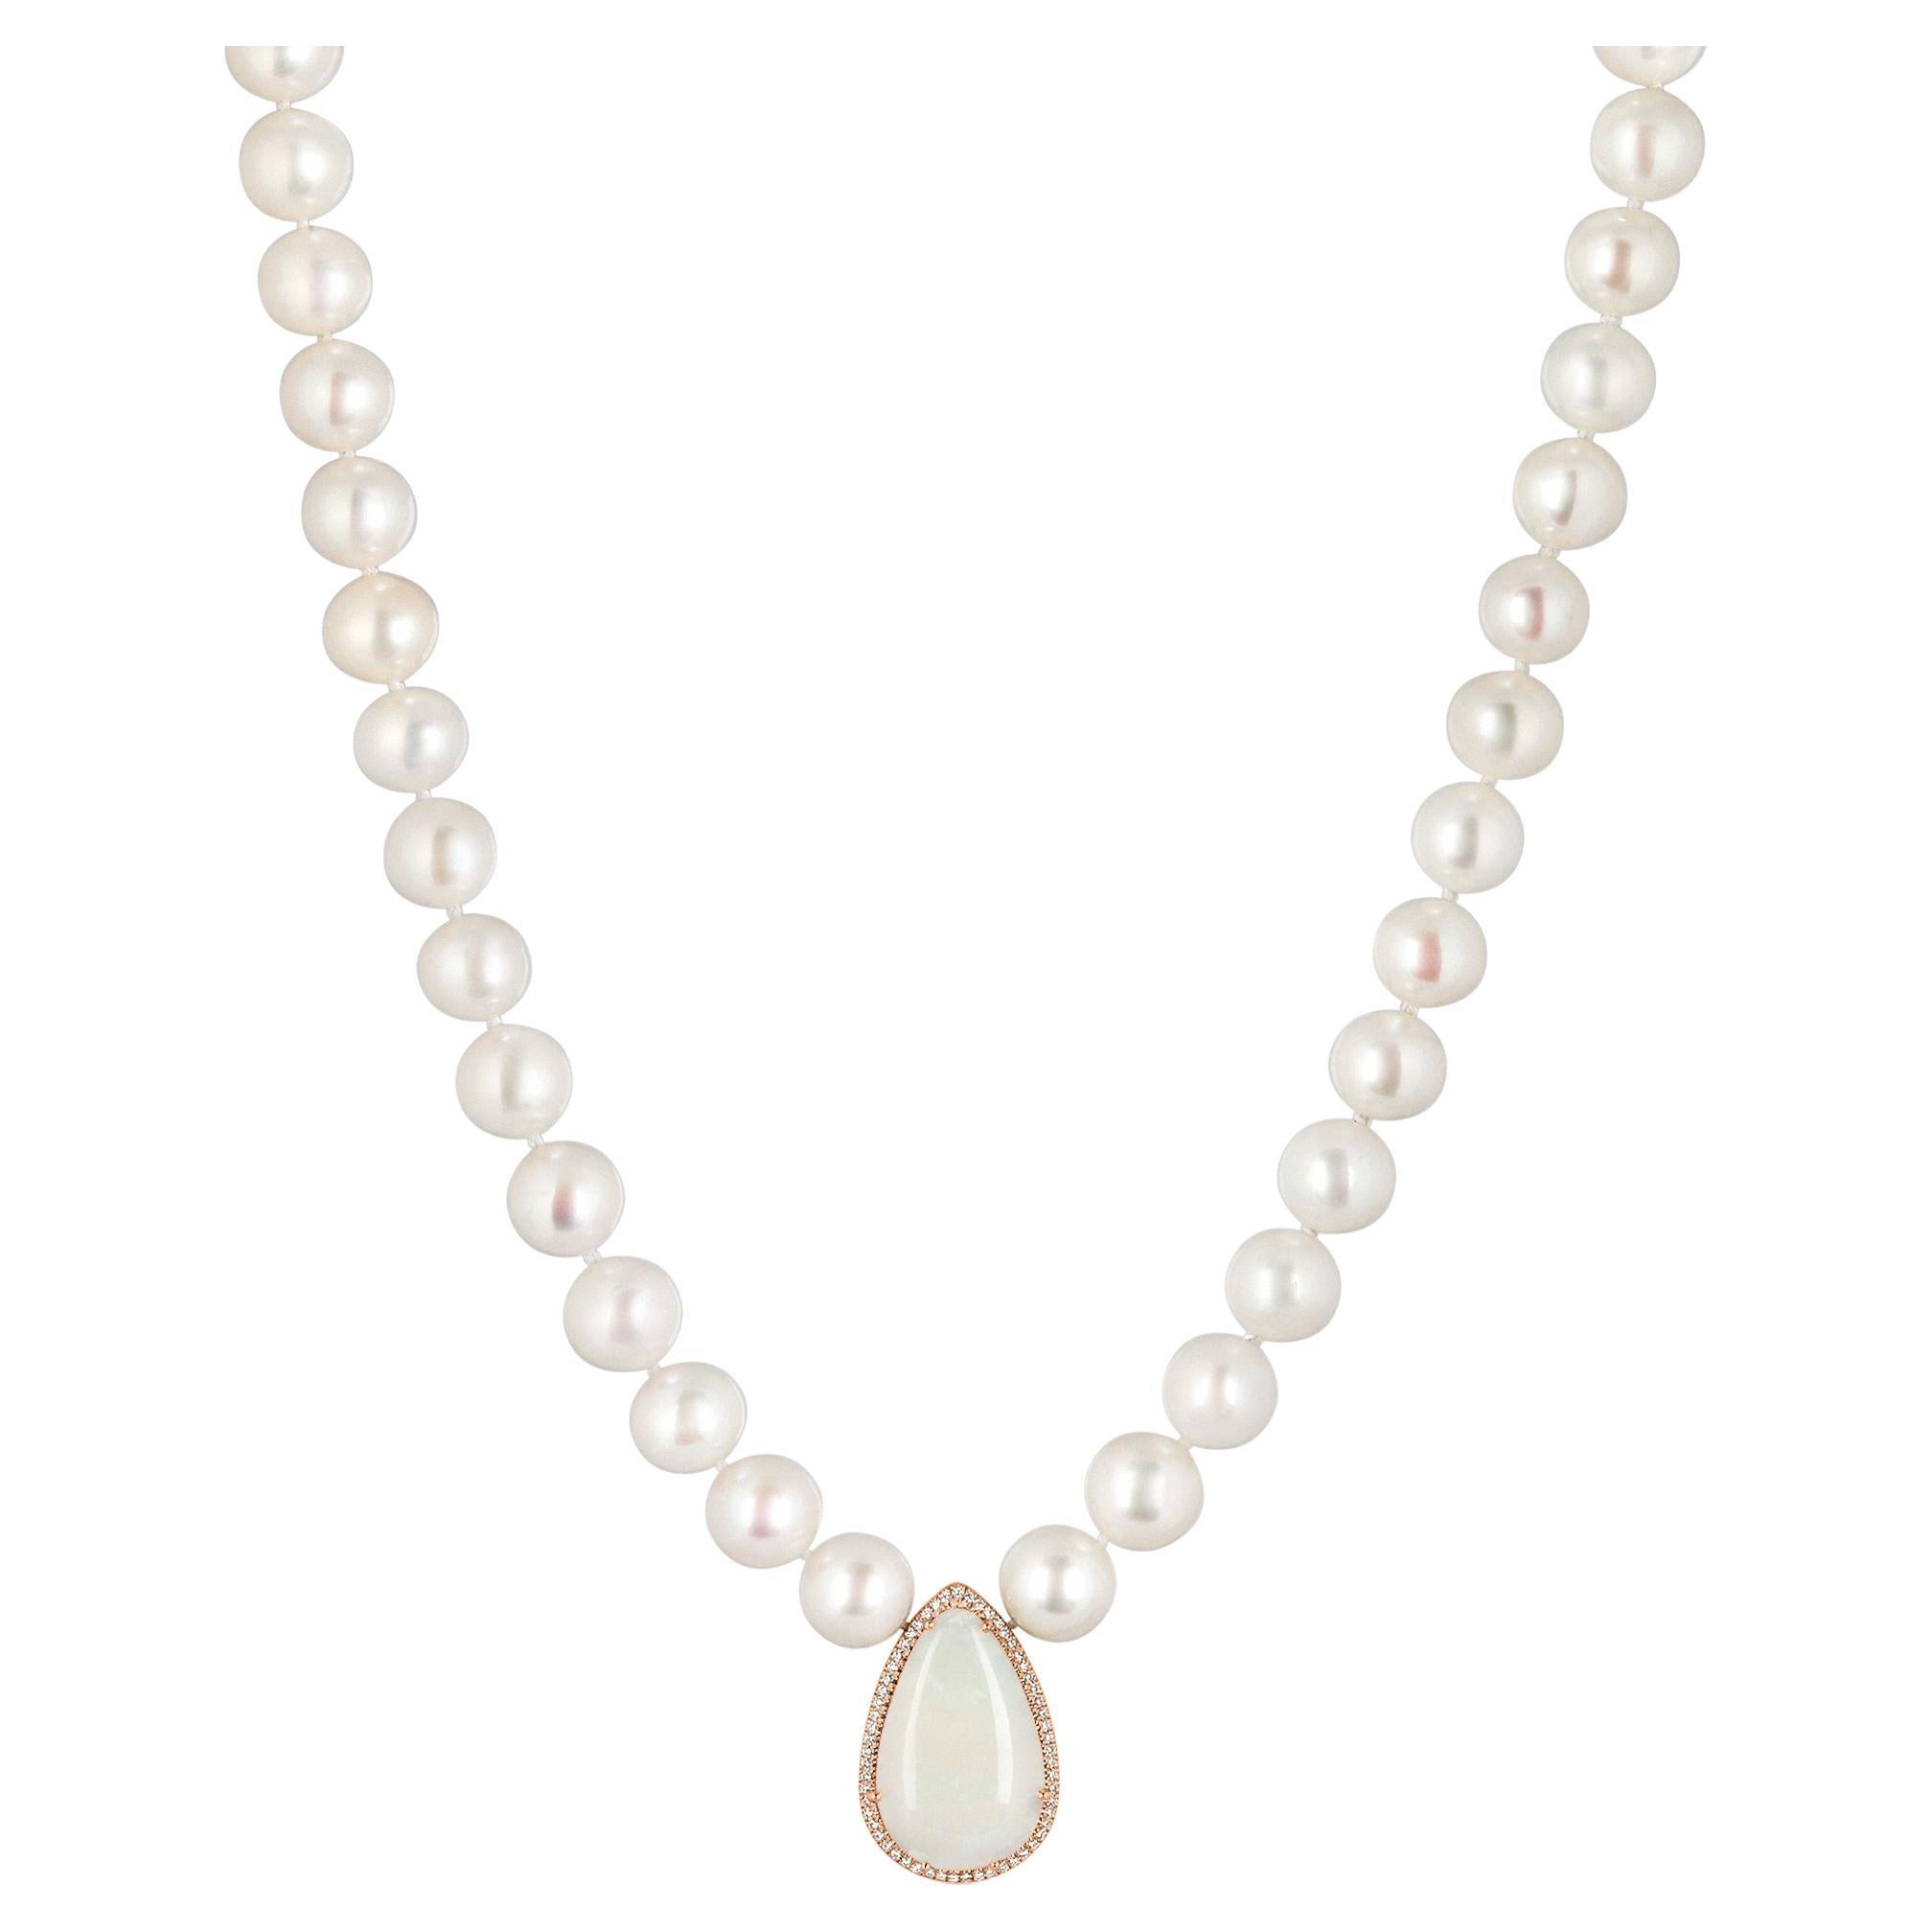 6.03 Carat Opal And Pearl Necklace For Sale